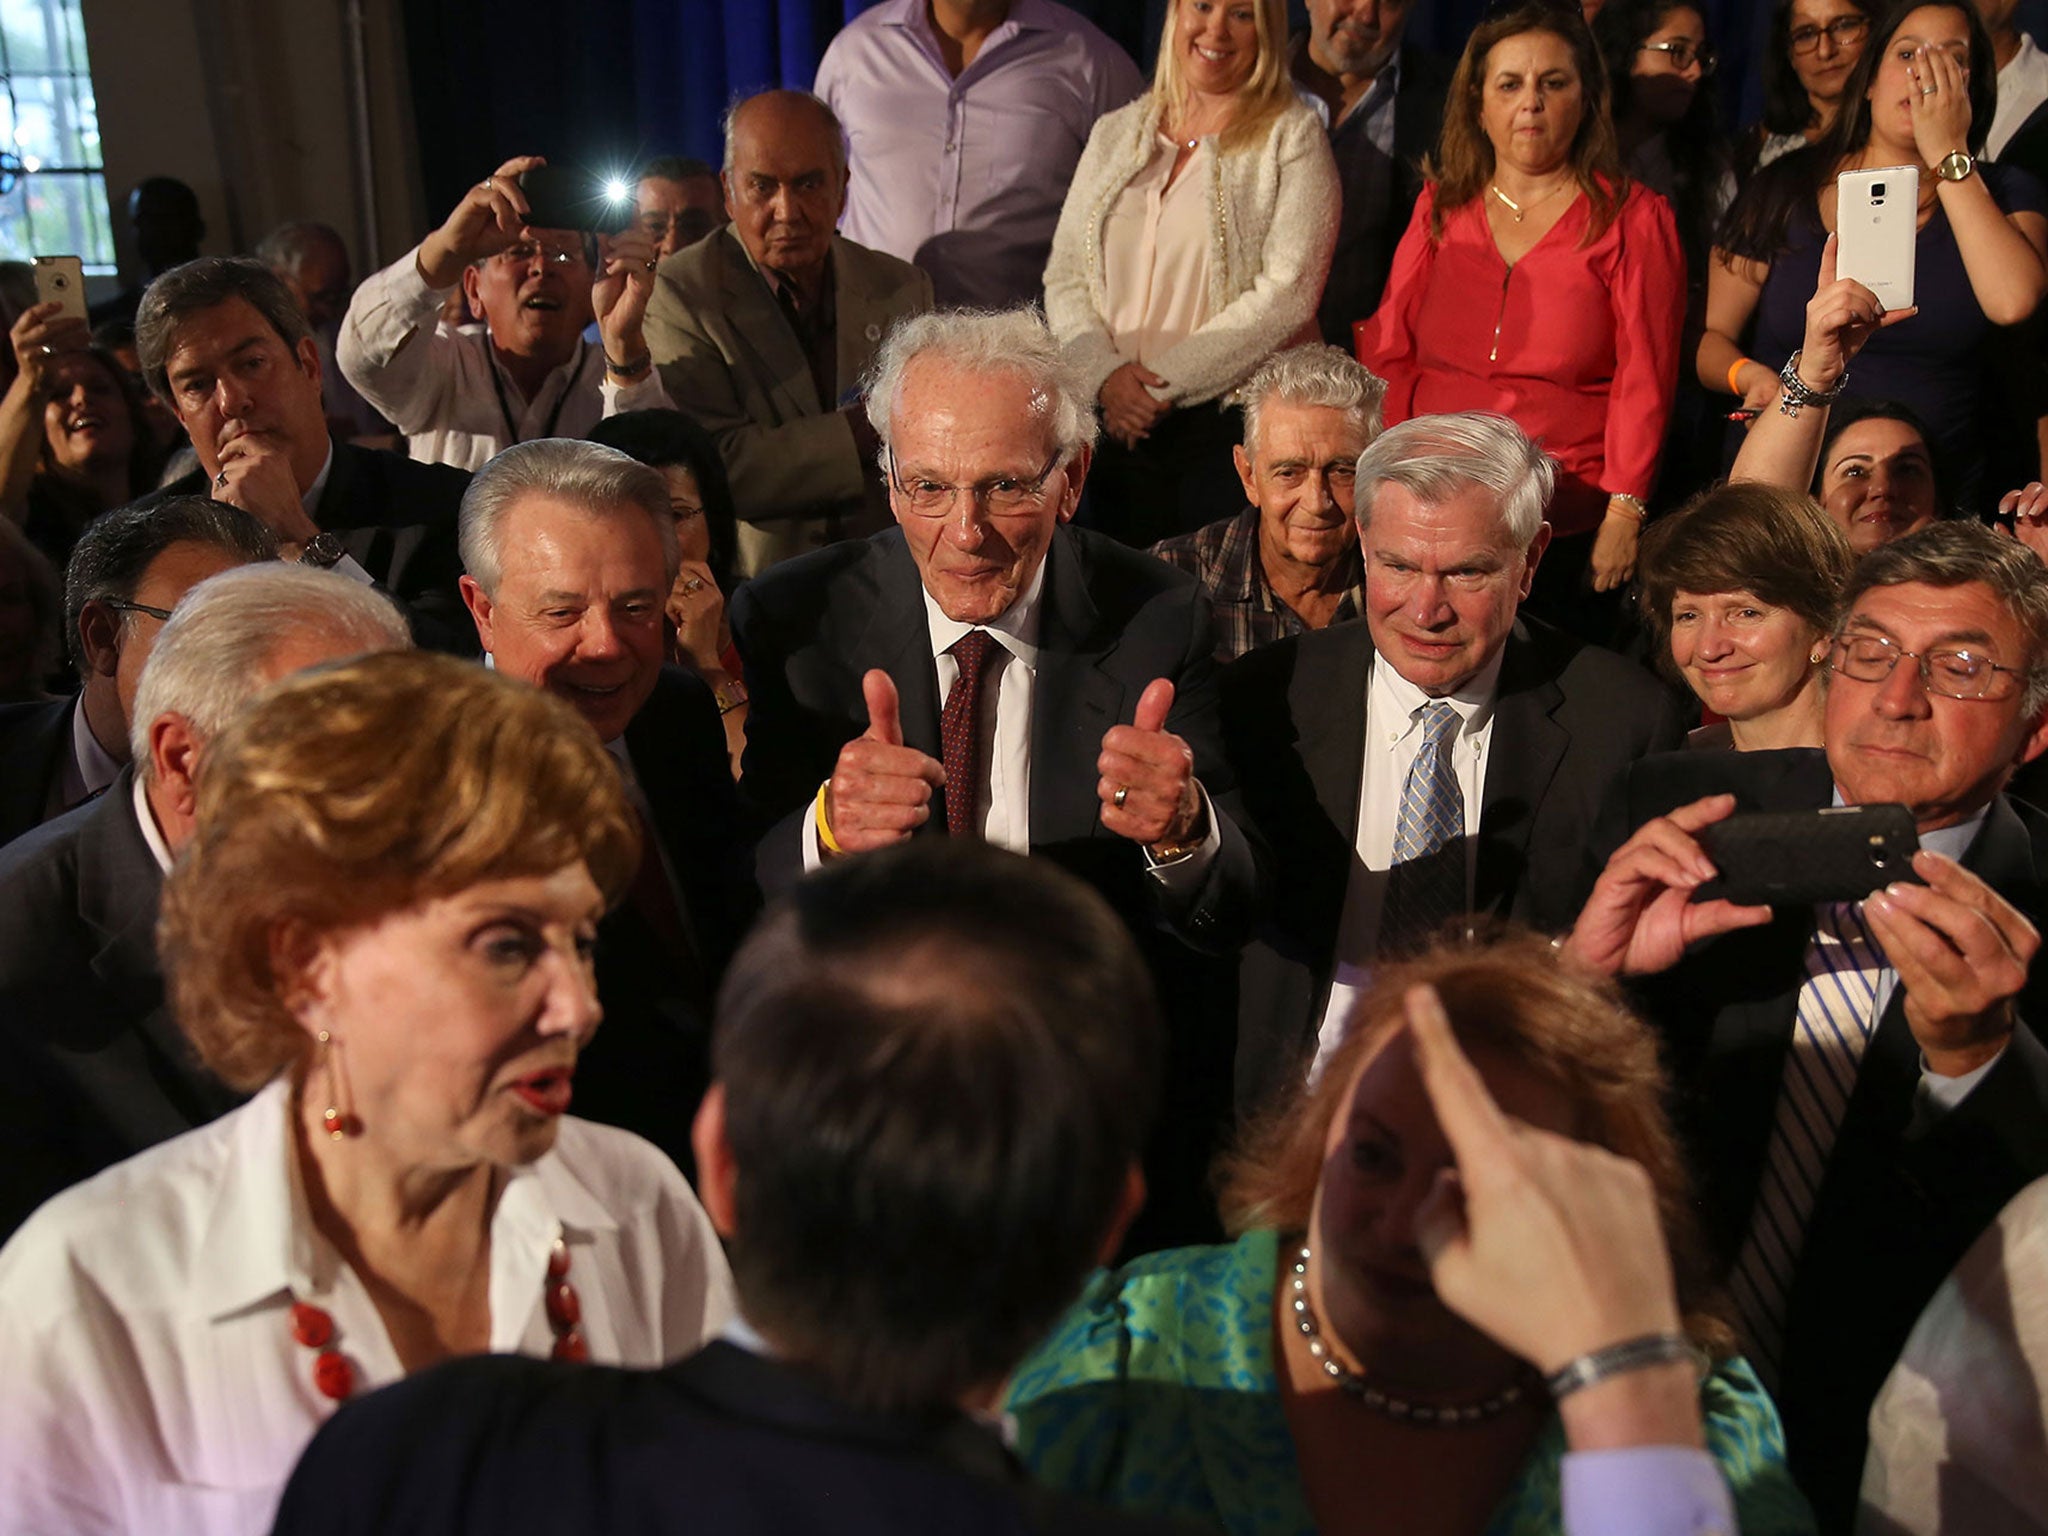 Norman Braman gives a thumbs-up to Rubio as he unveils his Republican presidential nomination